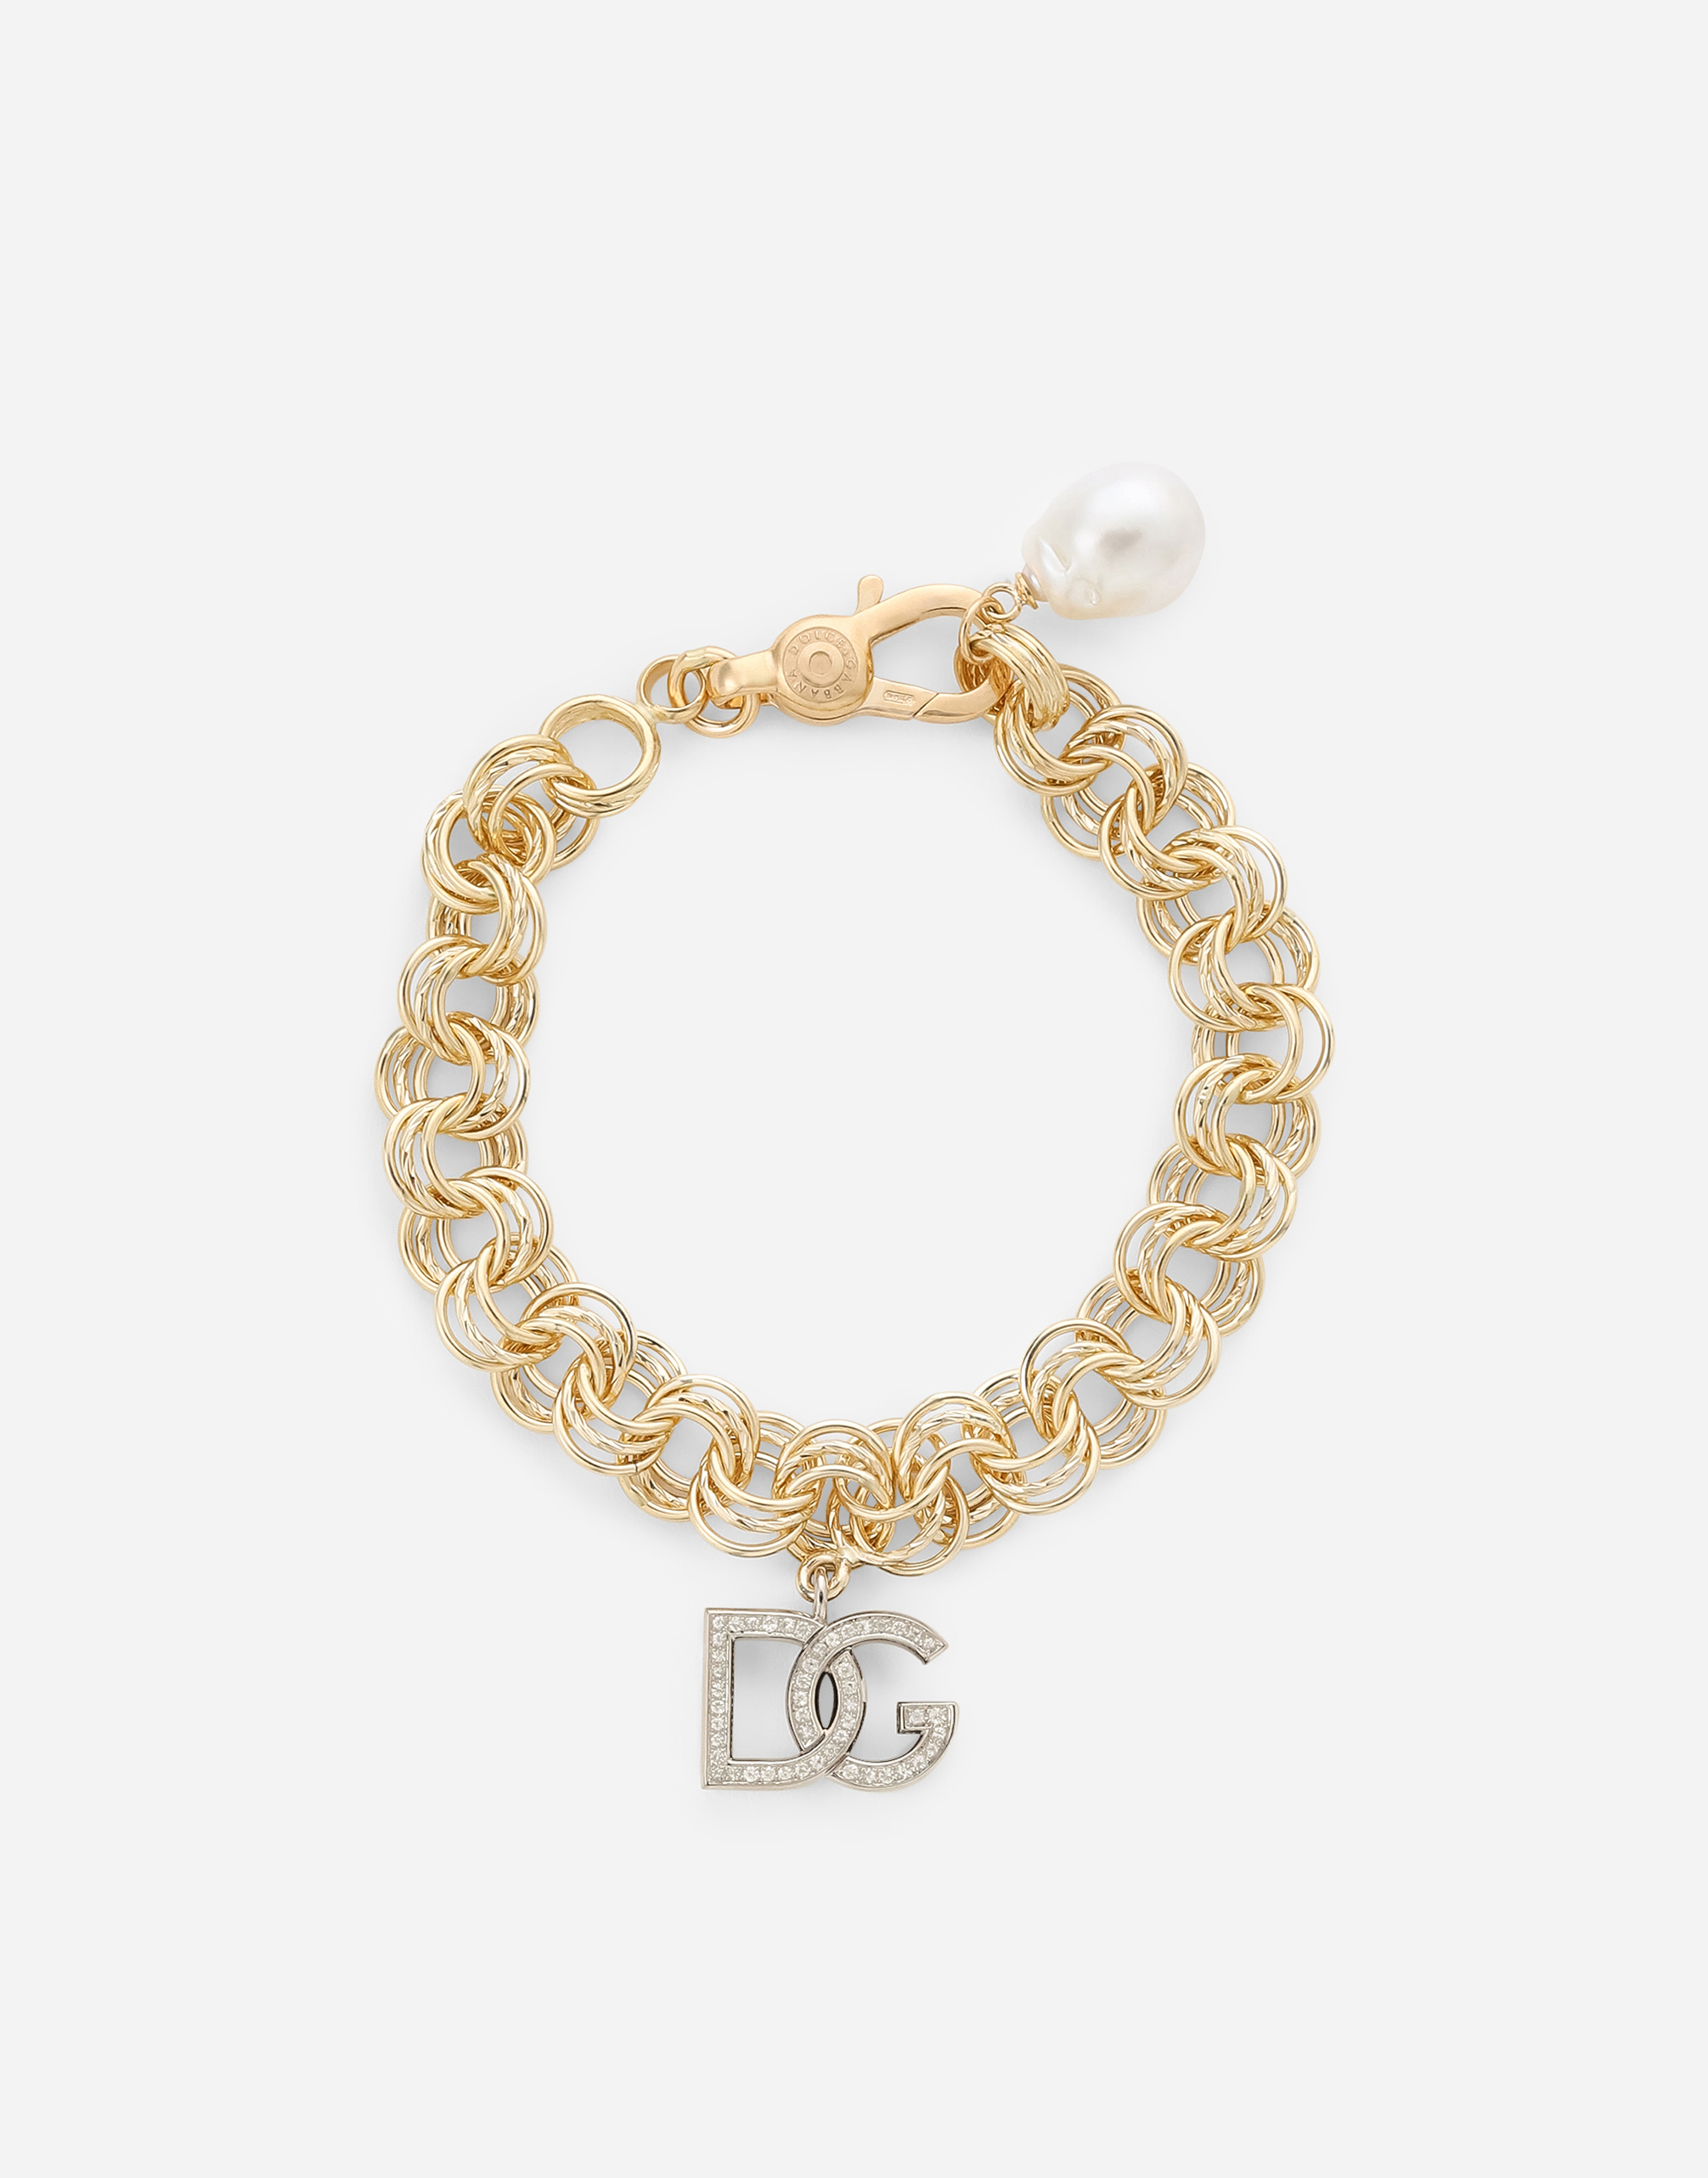 Logo bracelet in yellow and white 18kt gold with colorless sapphires in White and yellow gold